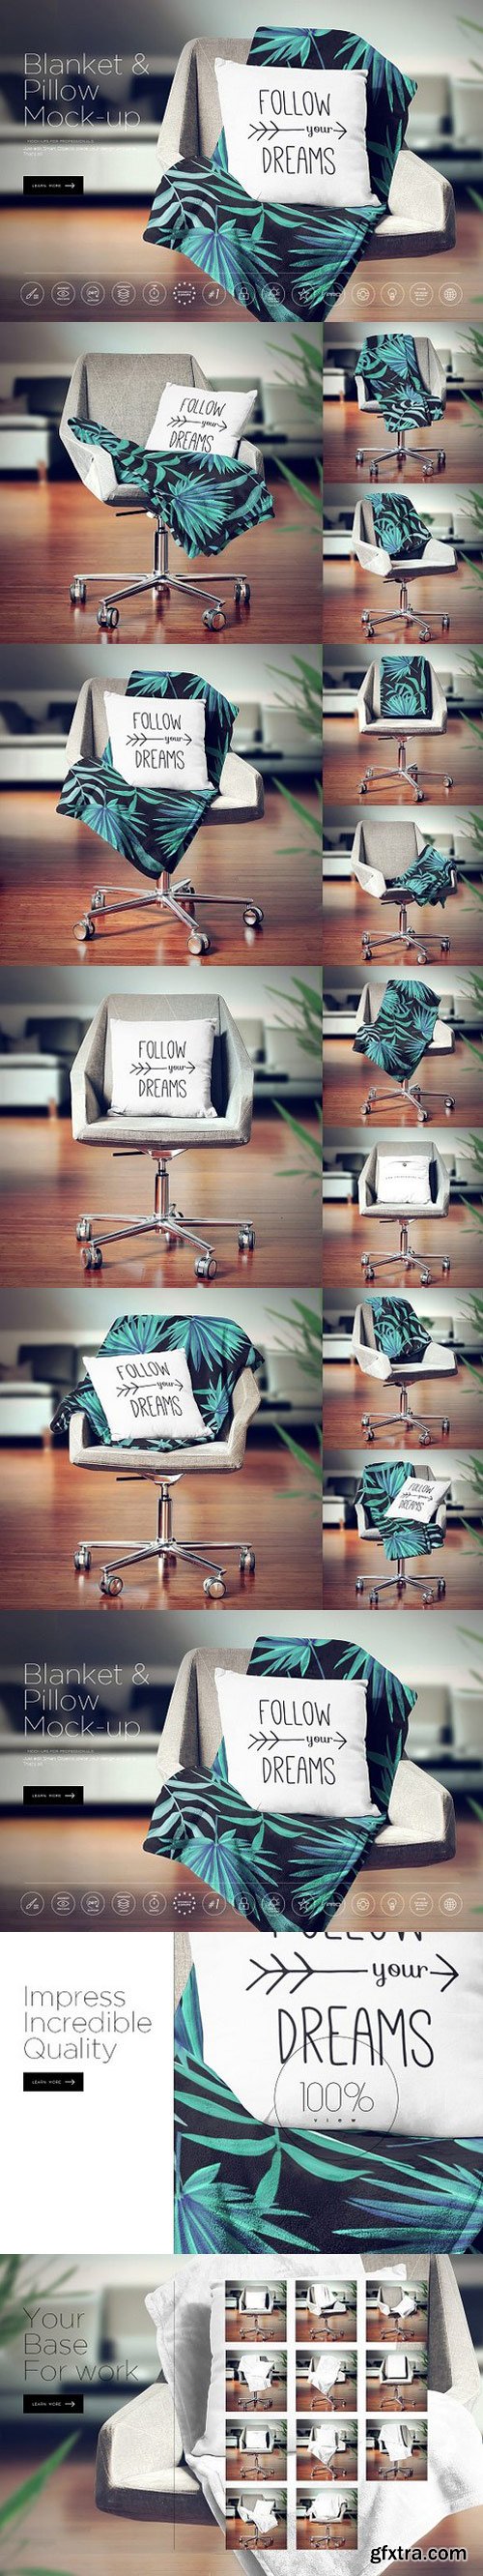 Blanket Pillow On Chair Mockup